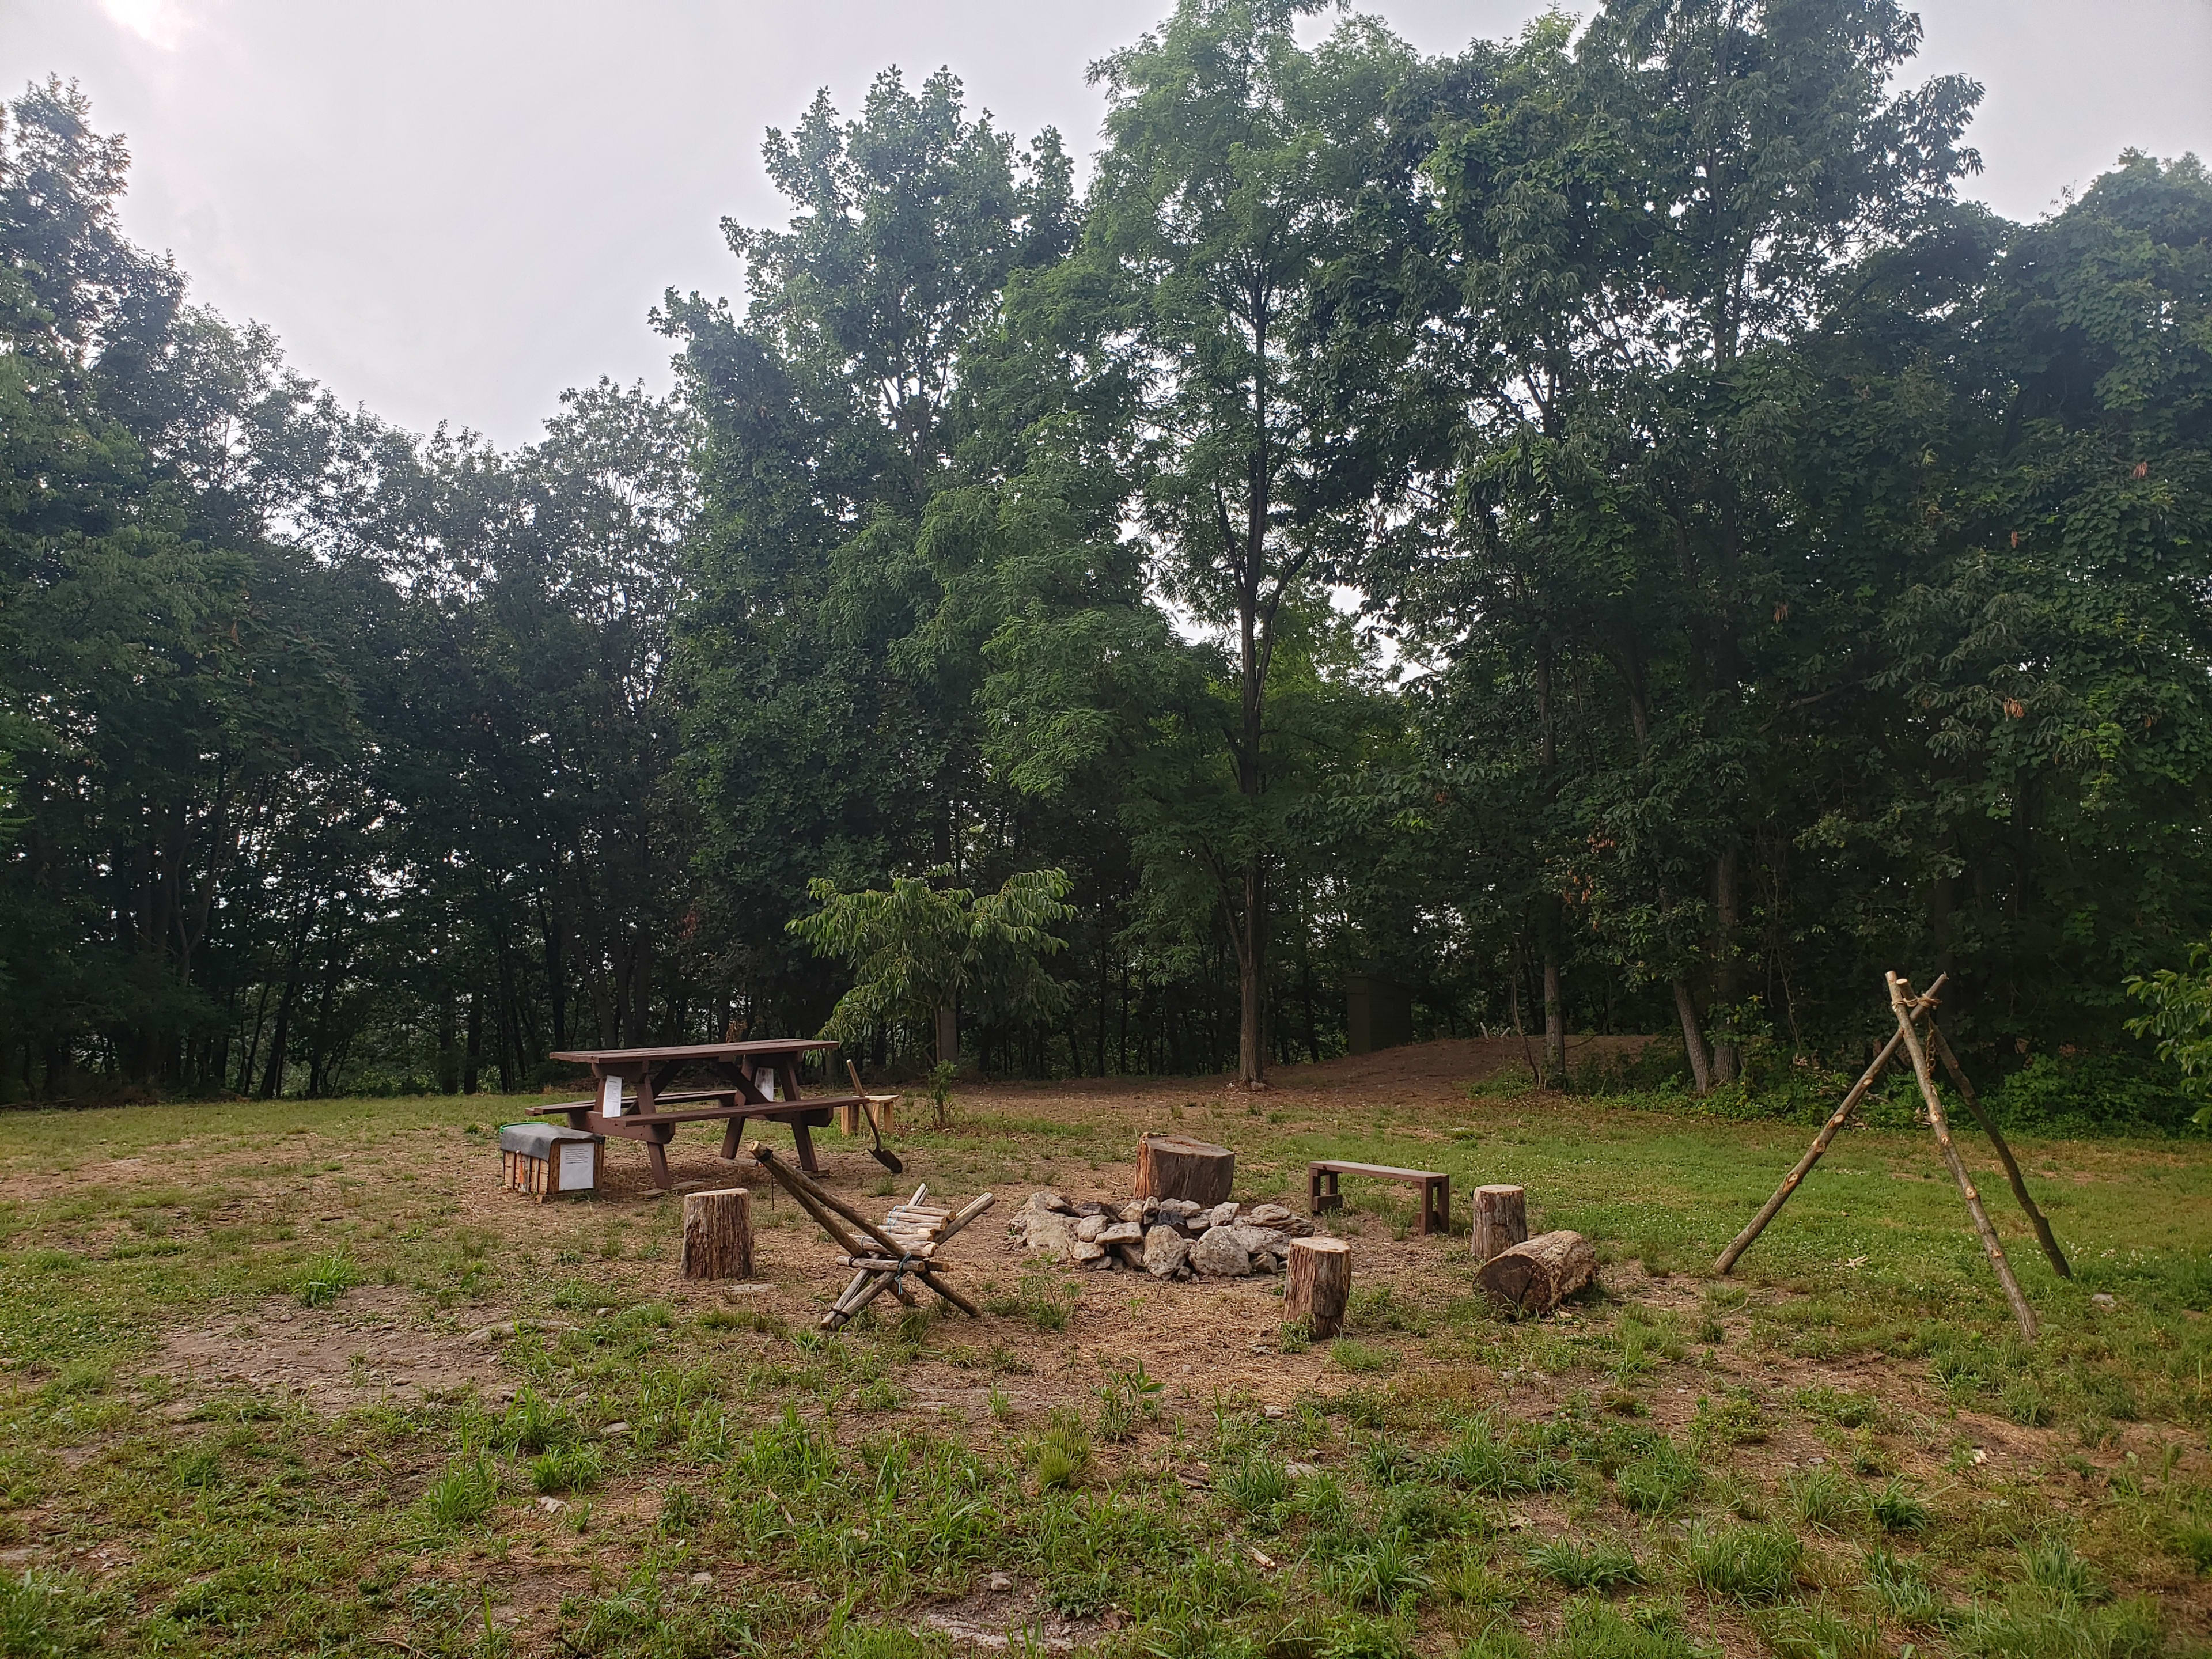 This is the main spot. Here is the fire pit, table, bench, seats. Off in the distance you can see the privy. The camp clearing is surrounded by forest which is all apart of the property.